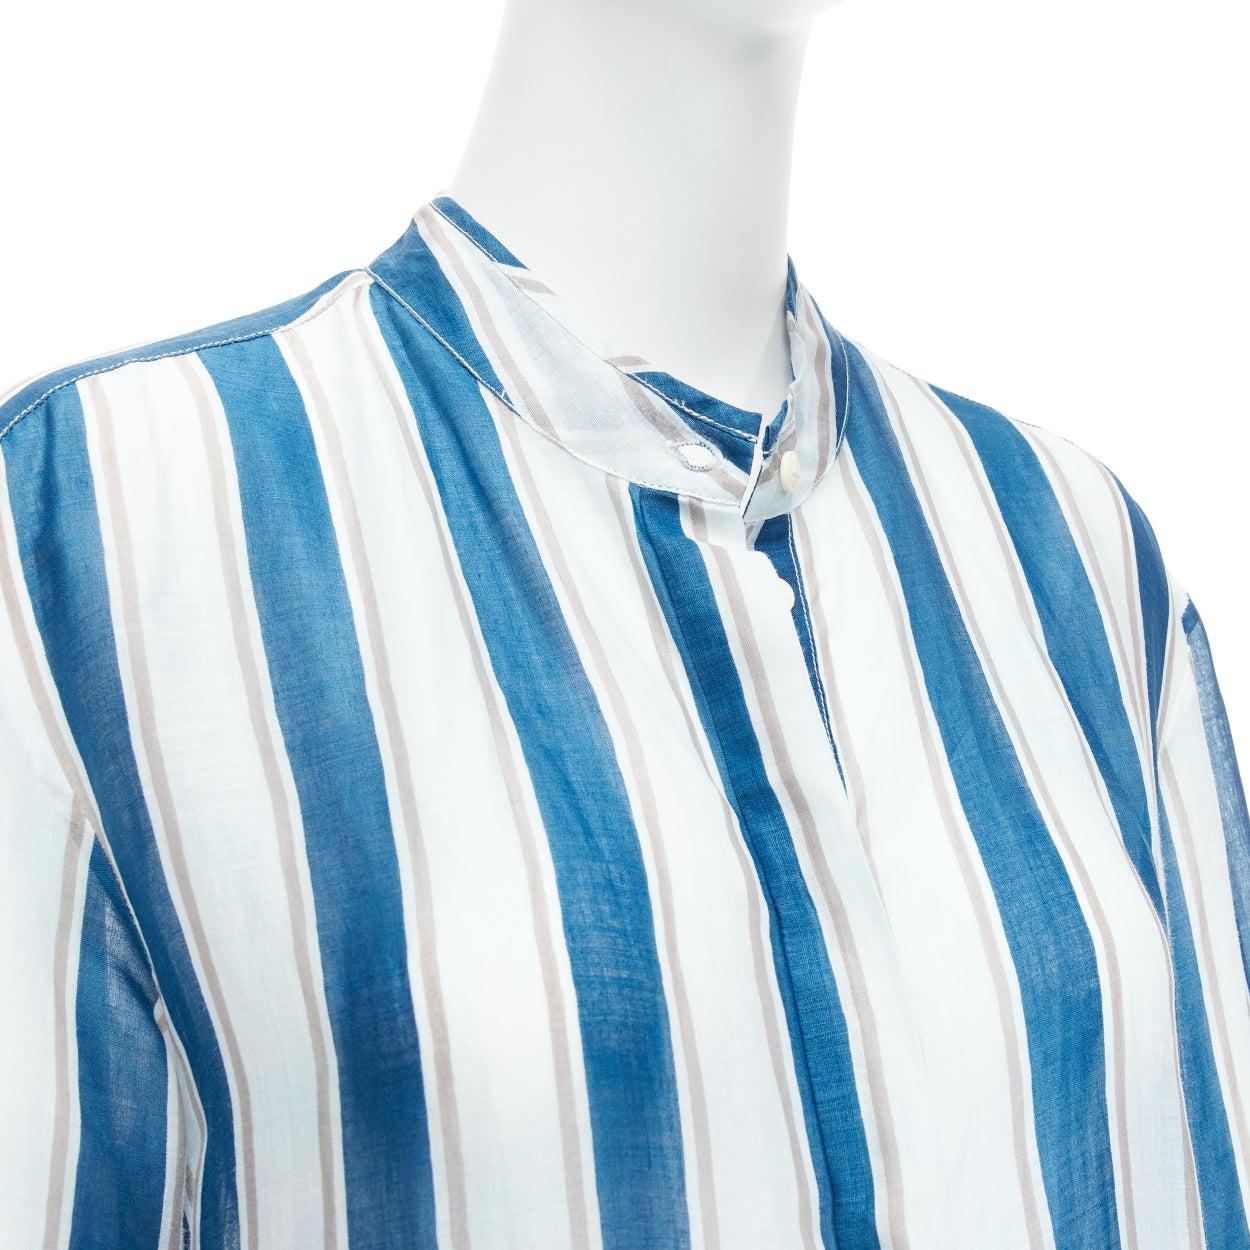 LEE MATHEWS blue grey stripe 100% linen high low hem casual shirt dress US0 XS
Reference: JACG/A00159
Brand: Lee Mathews
Material: Linen
Color: Blue, White
Pattern: Striped
Closure: Button
Made in: China

CONDITION:
Condition: Excellent, this item